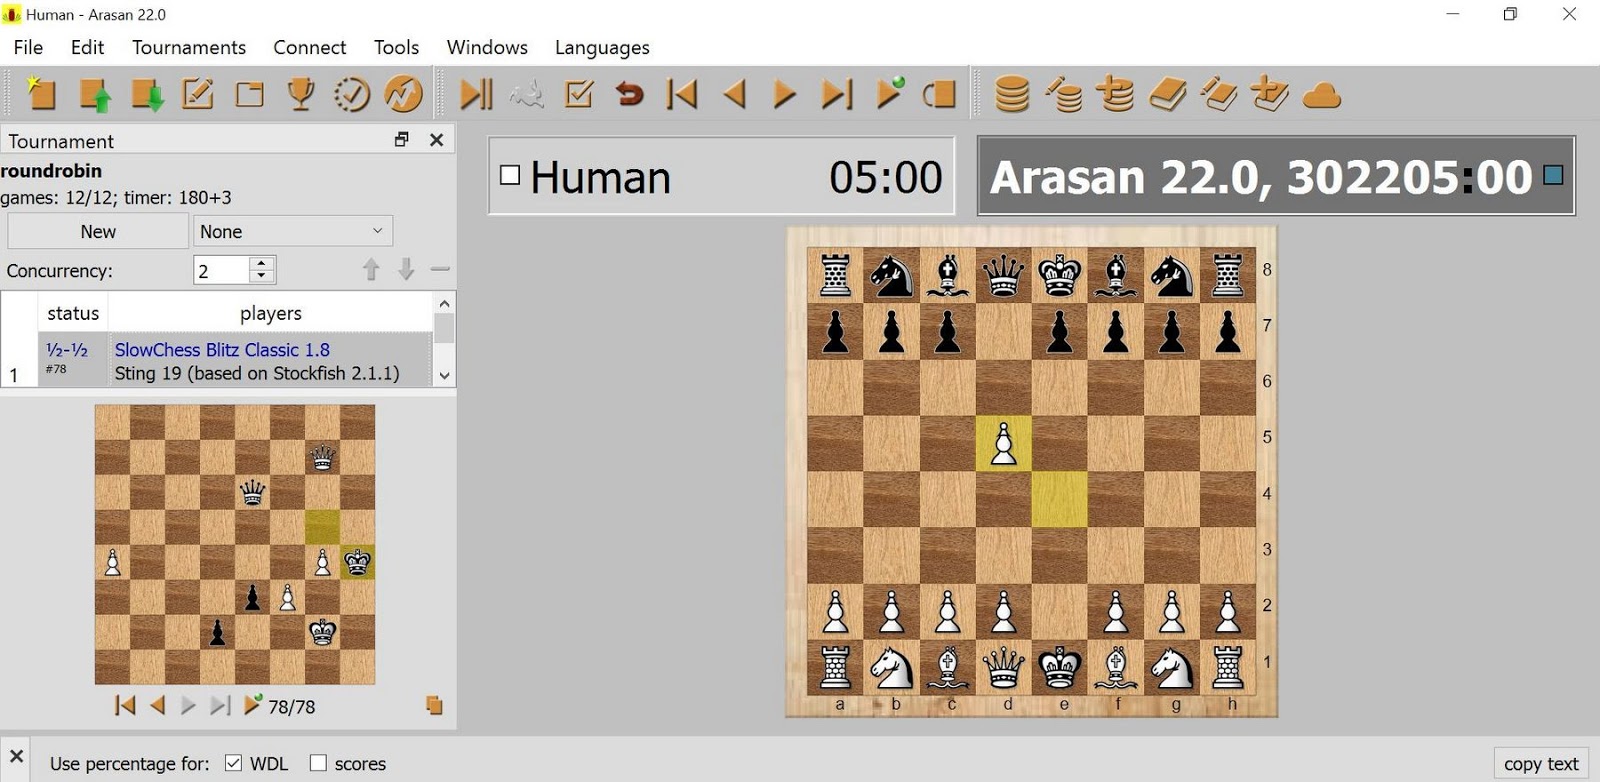 Nibbler 1.3.7: real-time analysis GUI for Leela Chess Zero (Lc0) - Windowas  and Linux